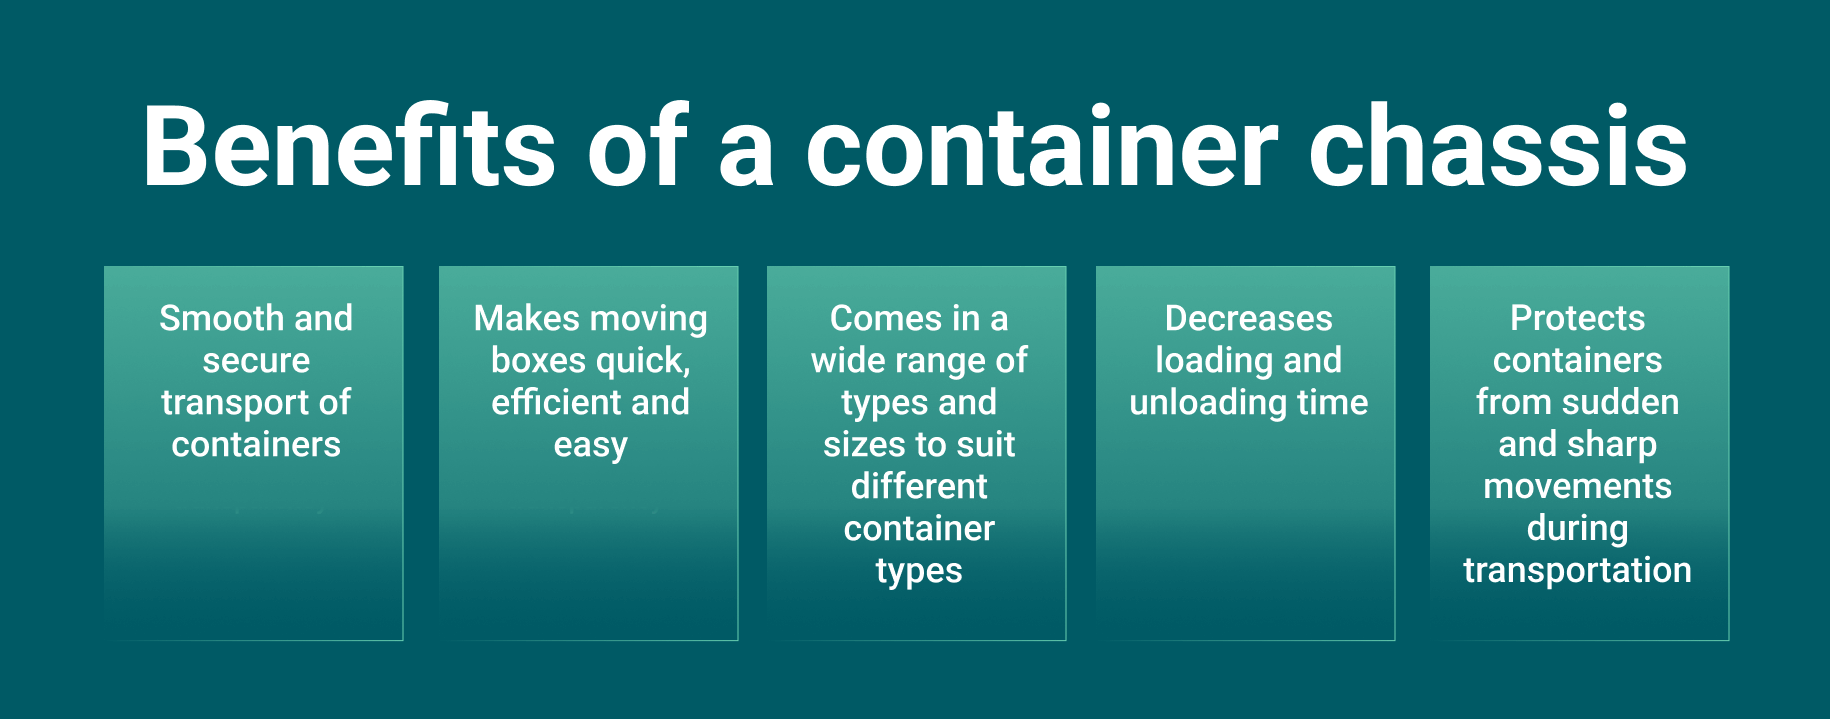 Benefits of a container chassis